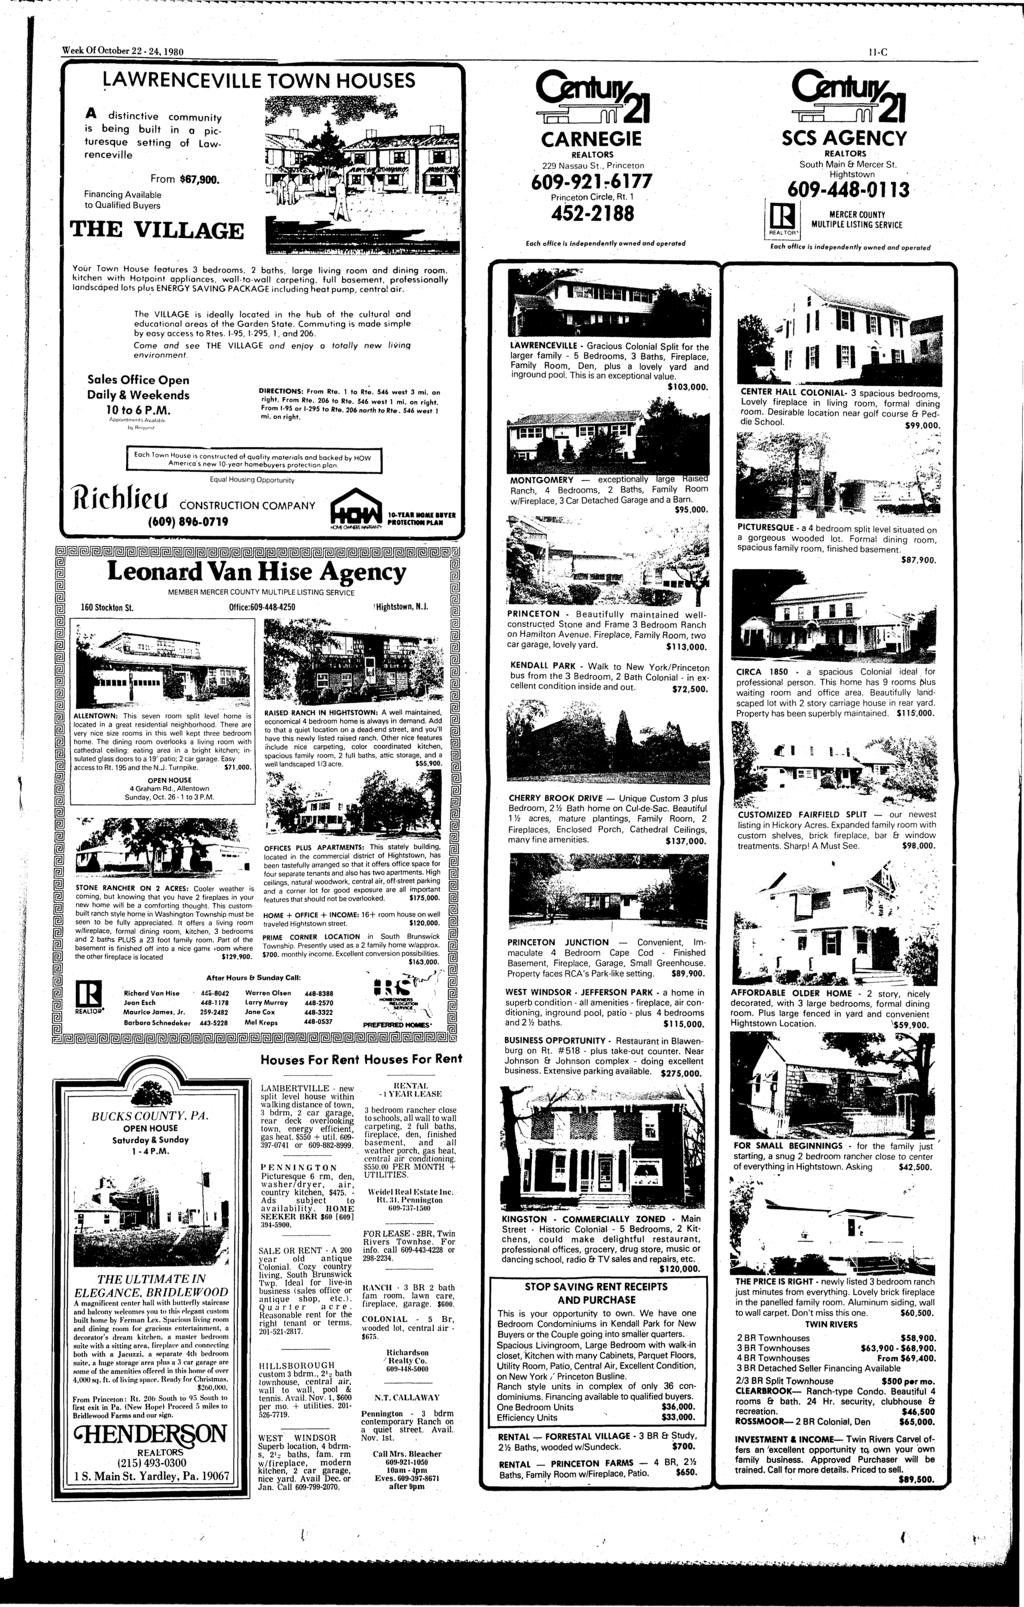 Week Of October 22-24,1980 11-C LAWRENCEVILLE TOWN HOUSES A distinctive community is being built in a picturesque setting of Lawrenceville. From $67,900.